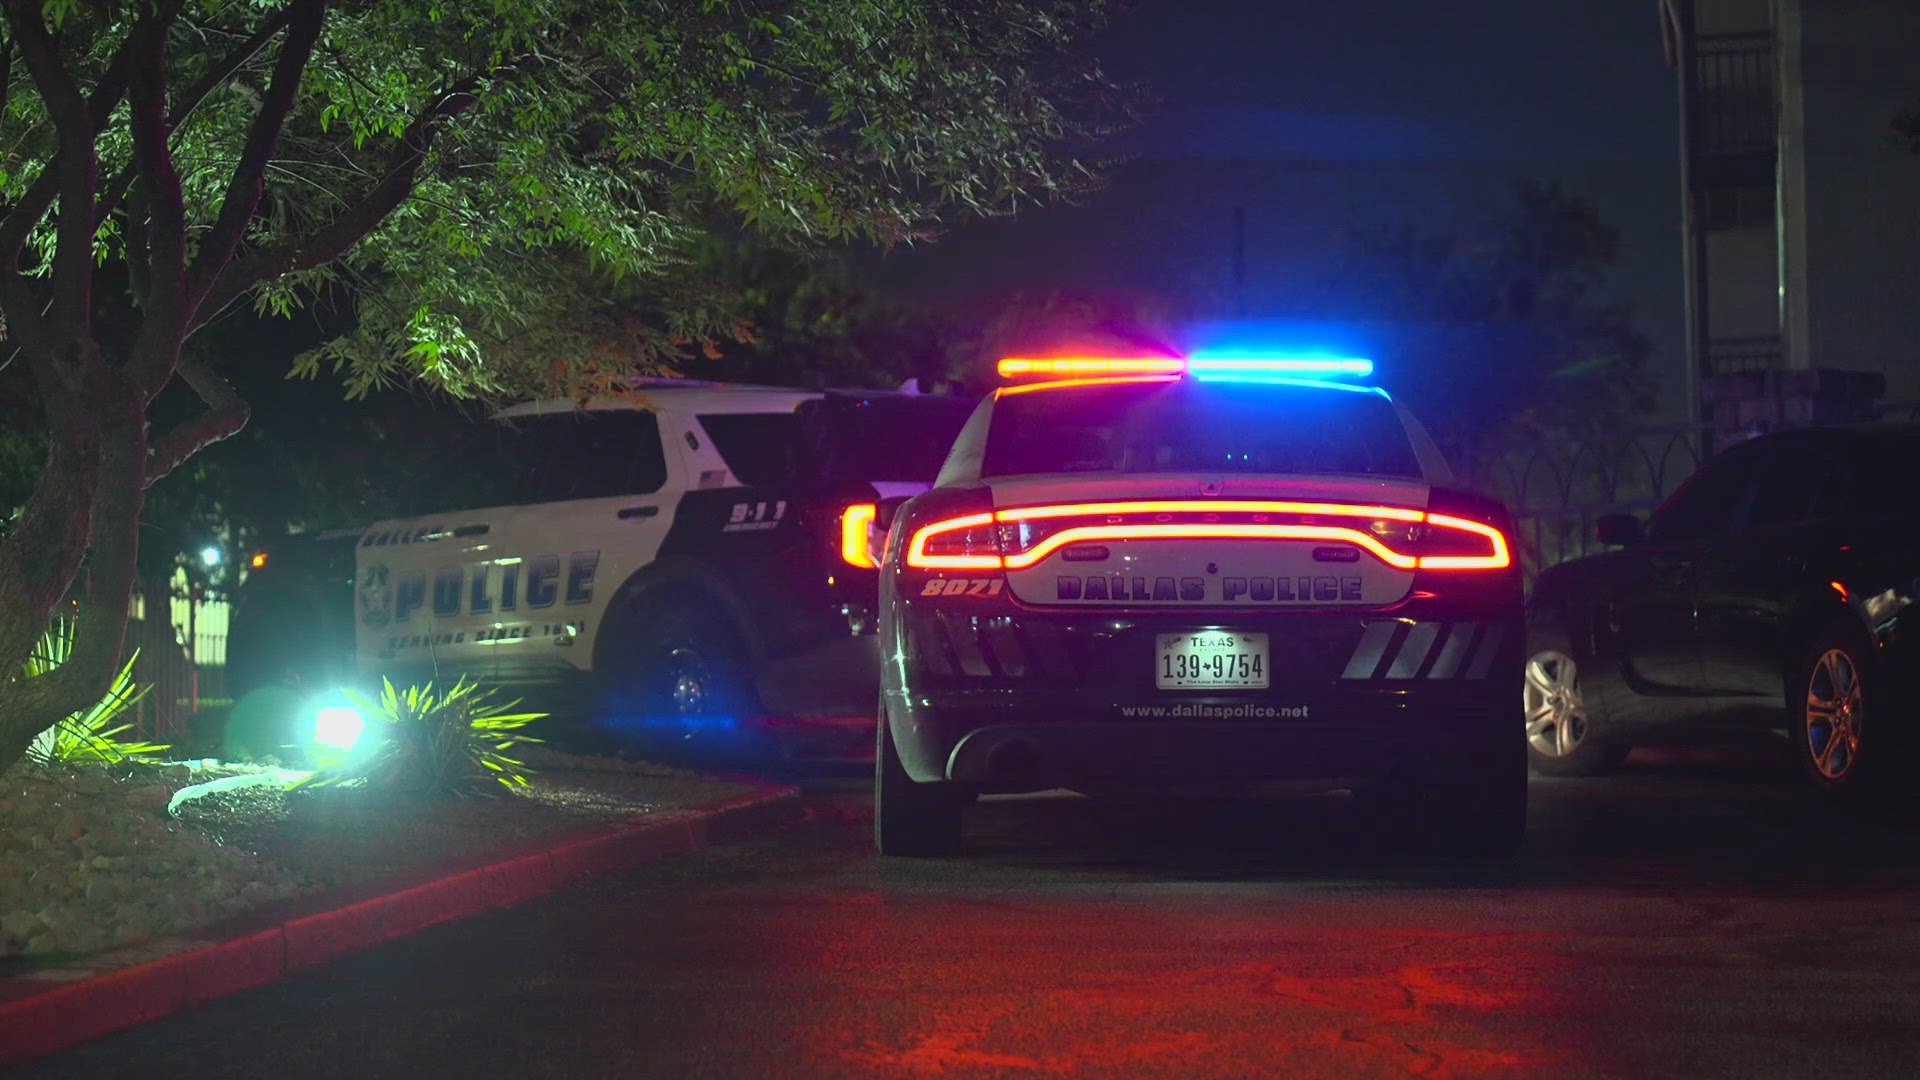 The shooting happened in the 5000 block of Belt Line Road in Far North Dallas, police said.